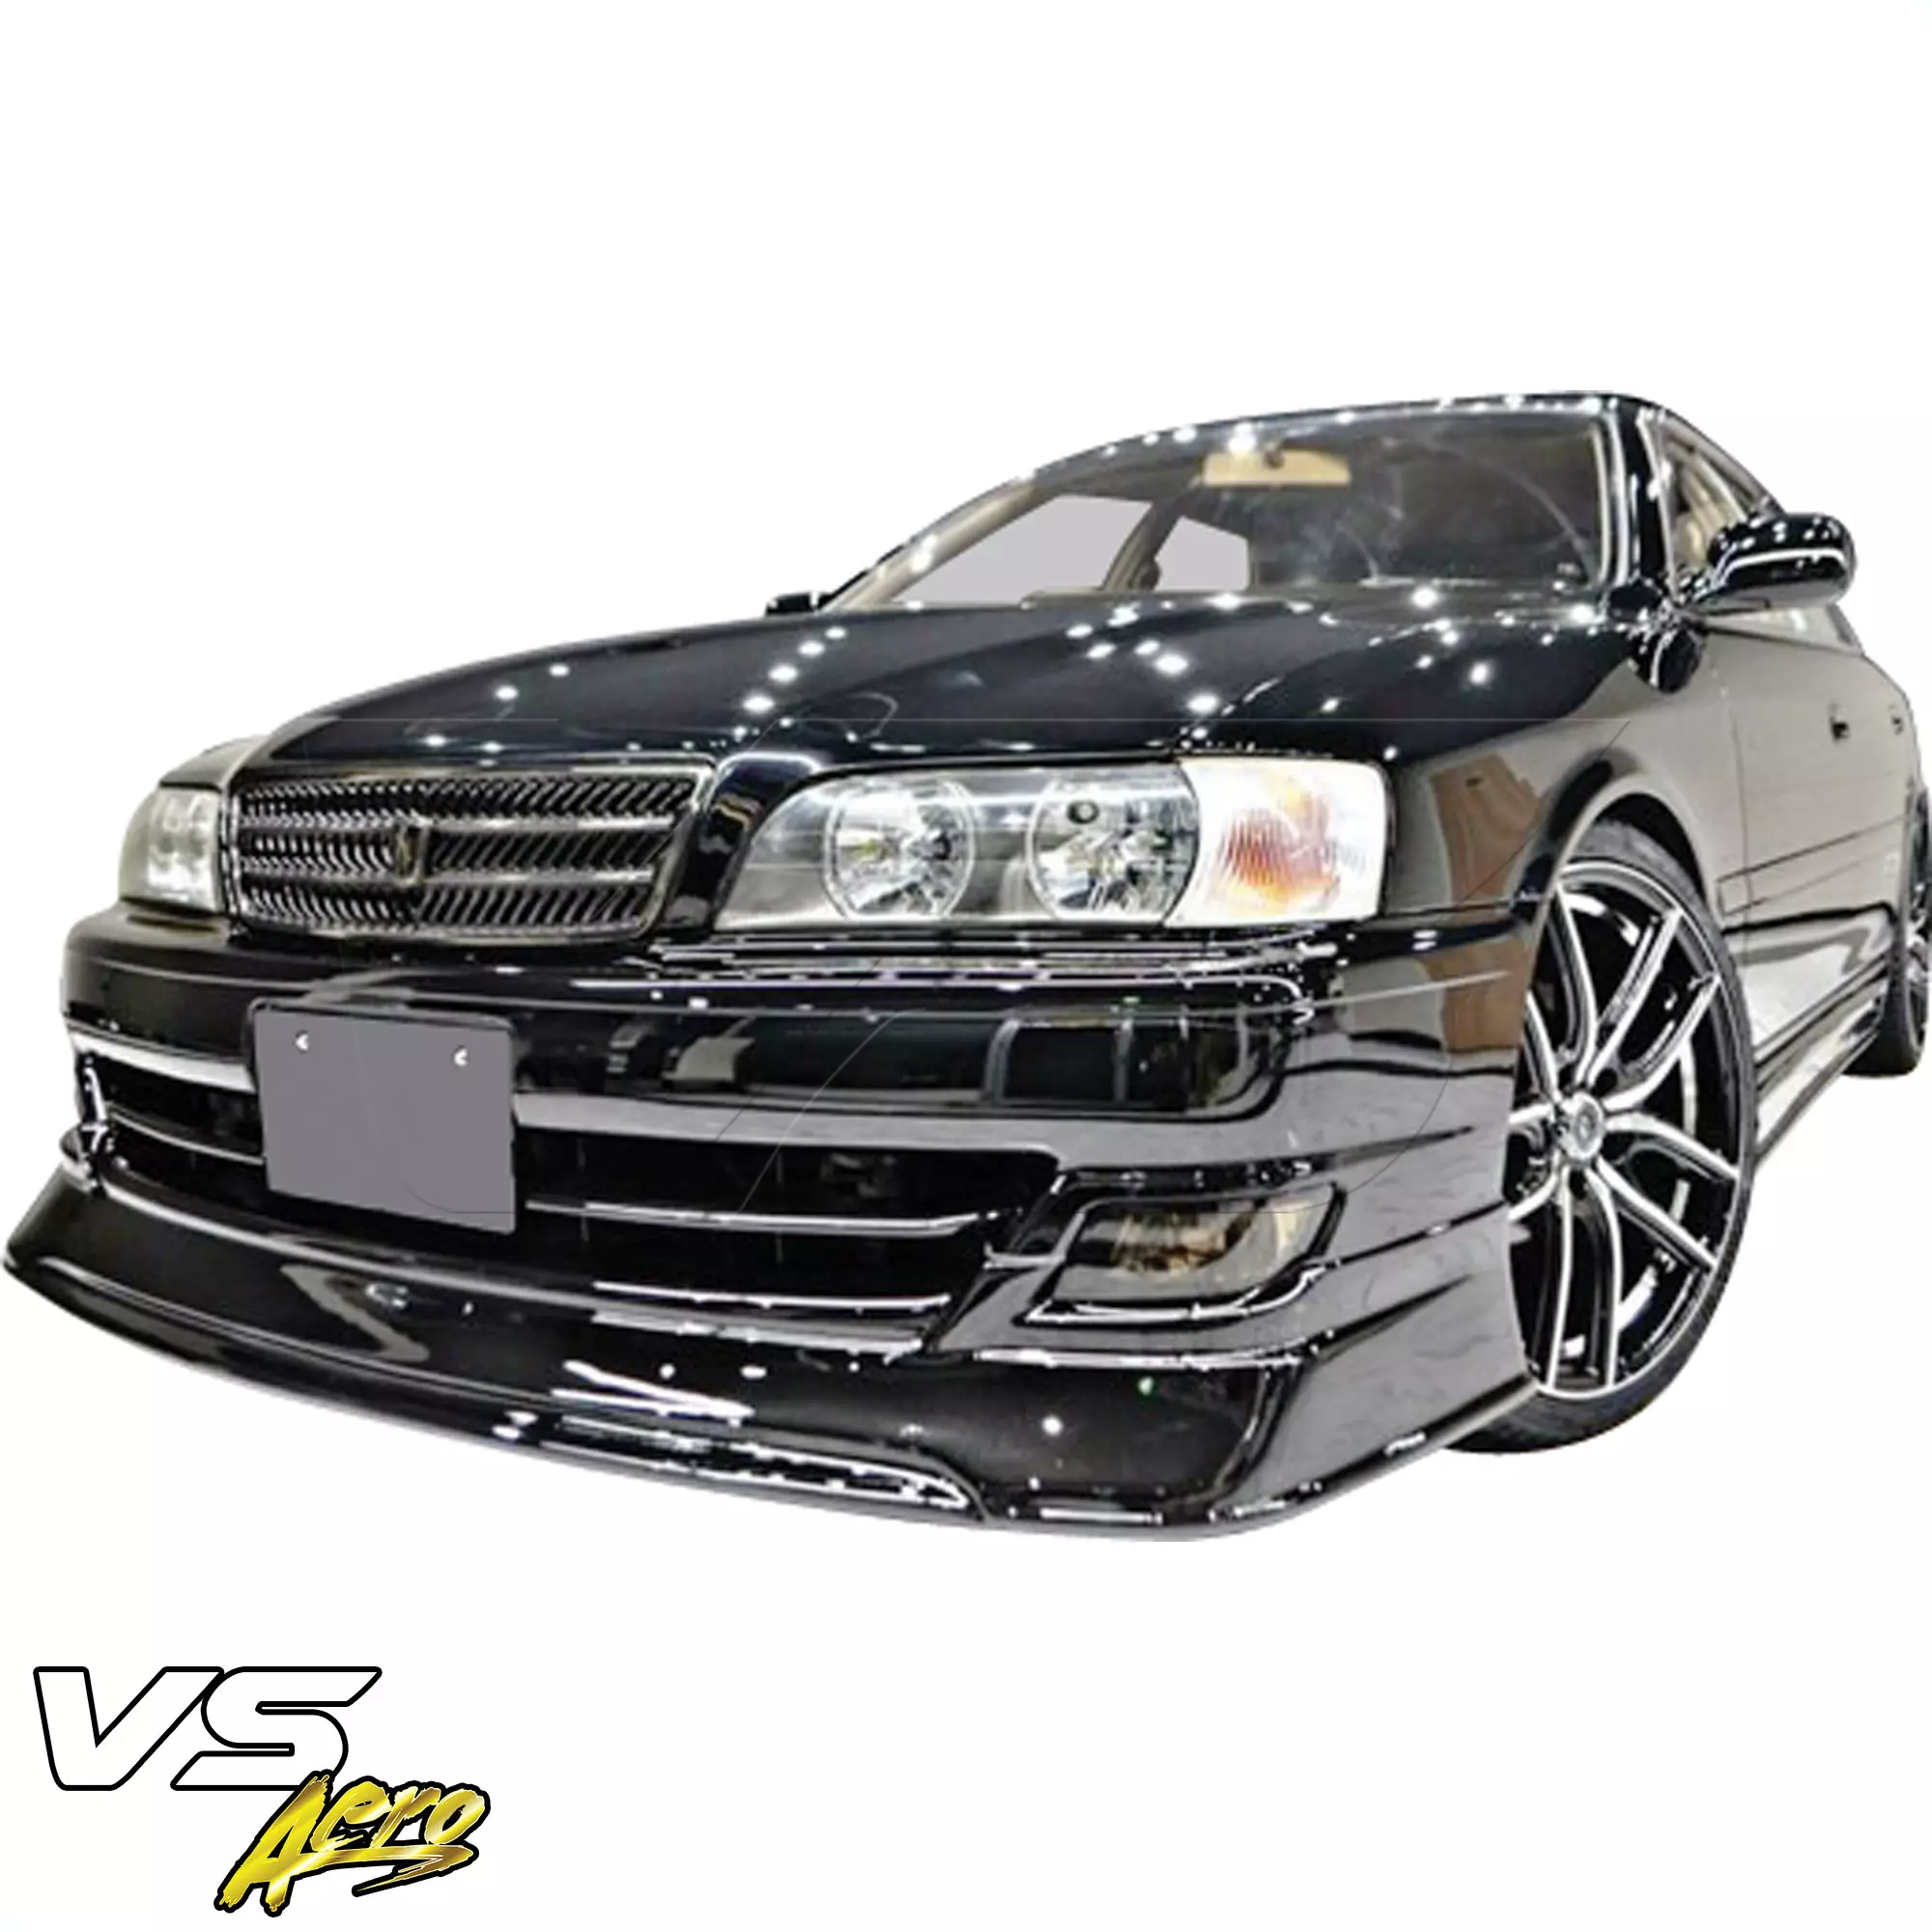 VSaero FRP TRAU Late Front Lip Valance > Toyota Chaser JZX100 1999-2000 - Image 14